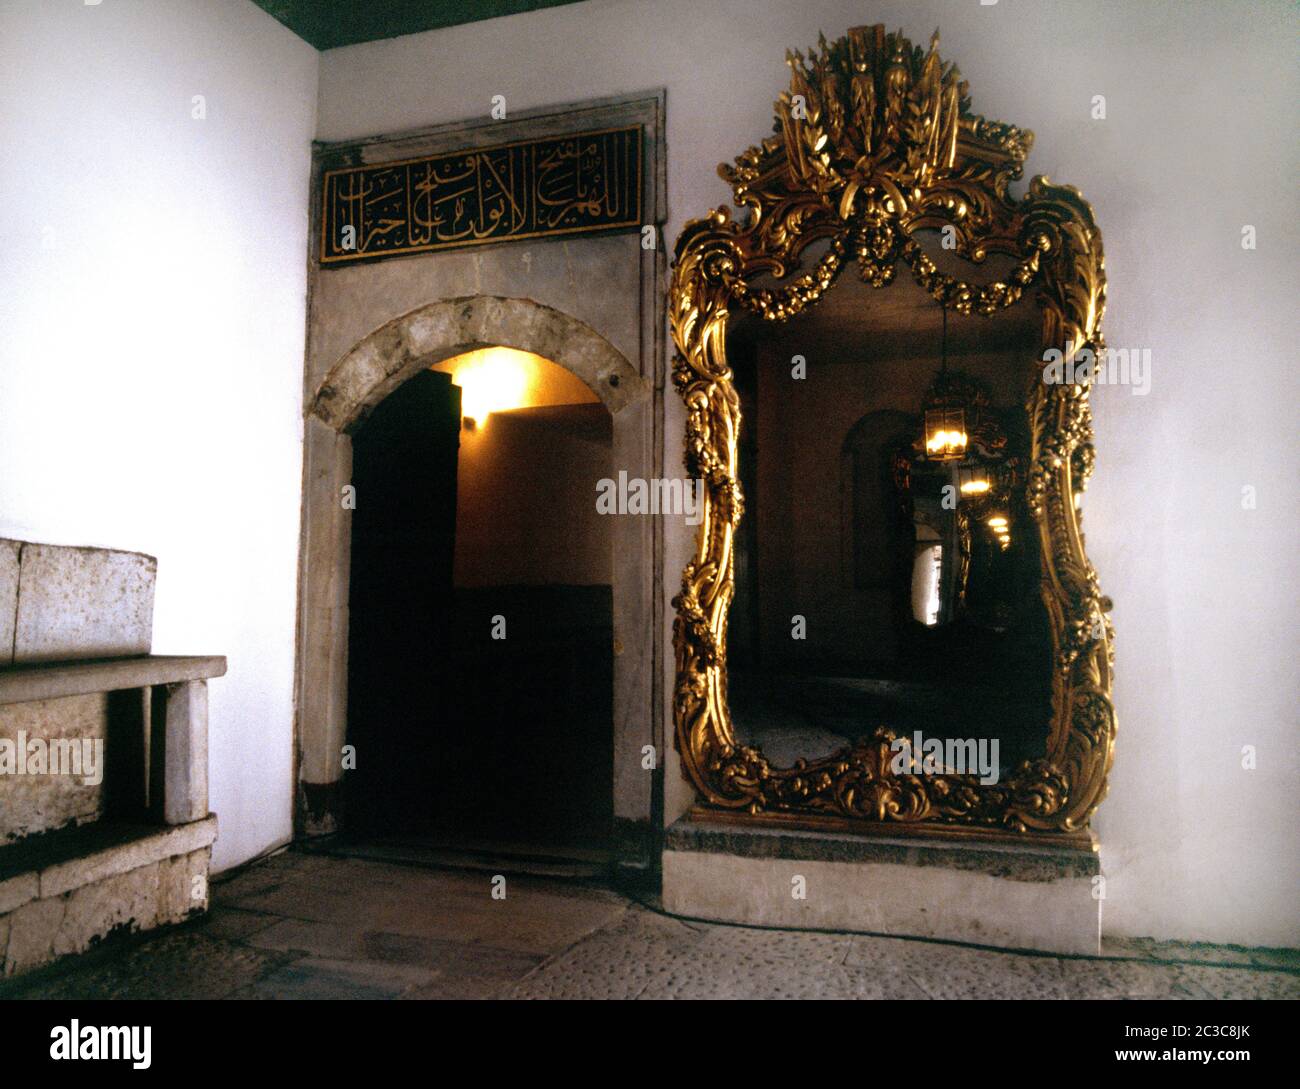 Topkapi Istanbul Turkey Harem Room with Ornate Mirror and Archway Stock Photo